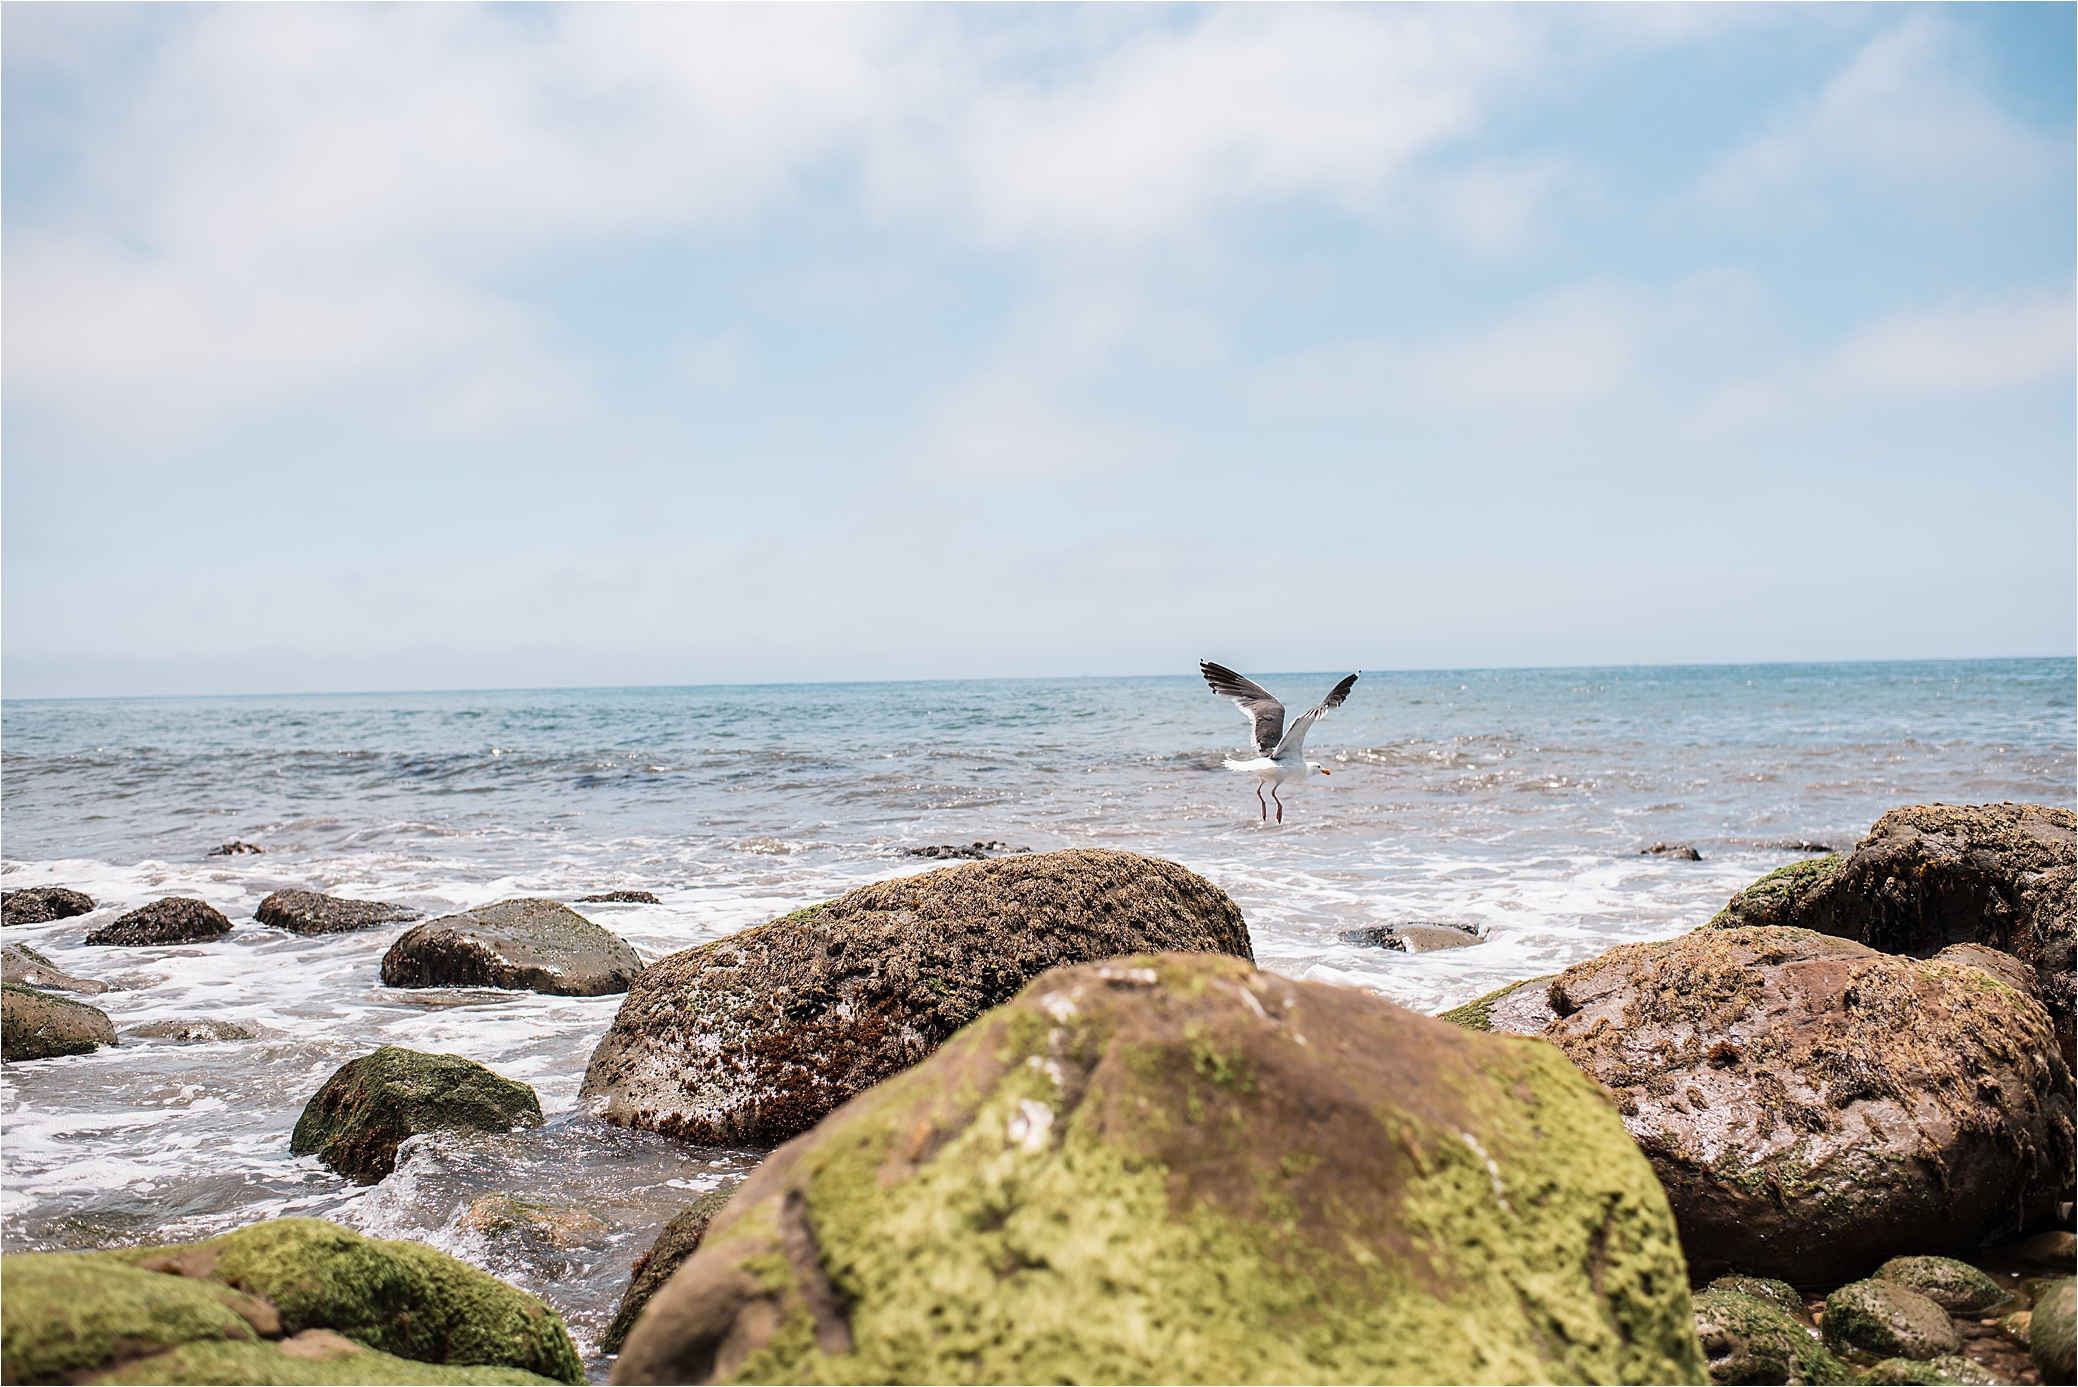 Seagull and rocky beach image